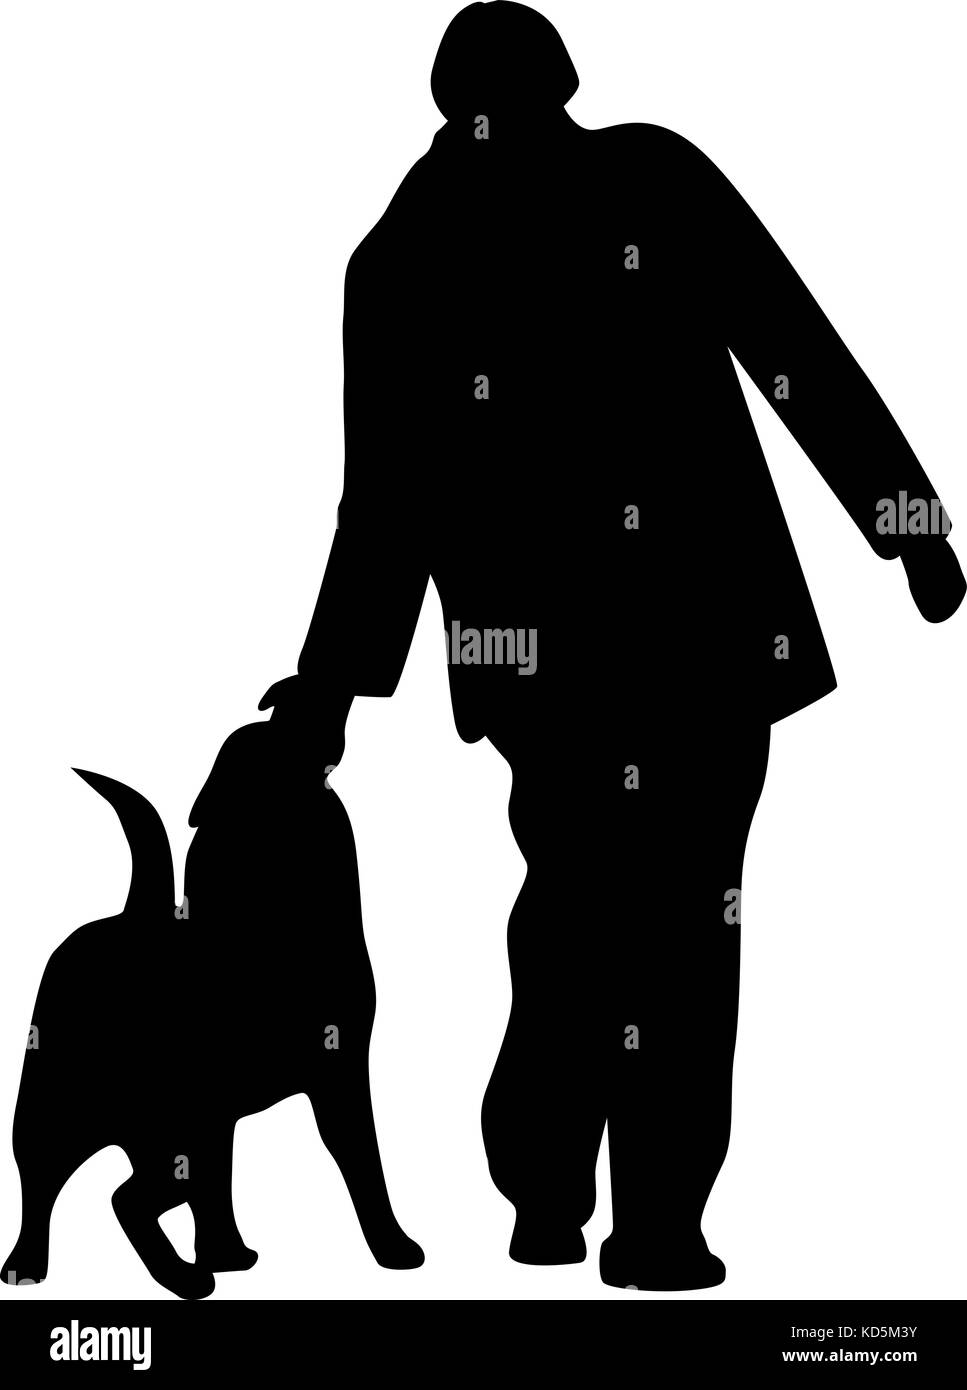 man and dog silhouette vector Stock Vector